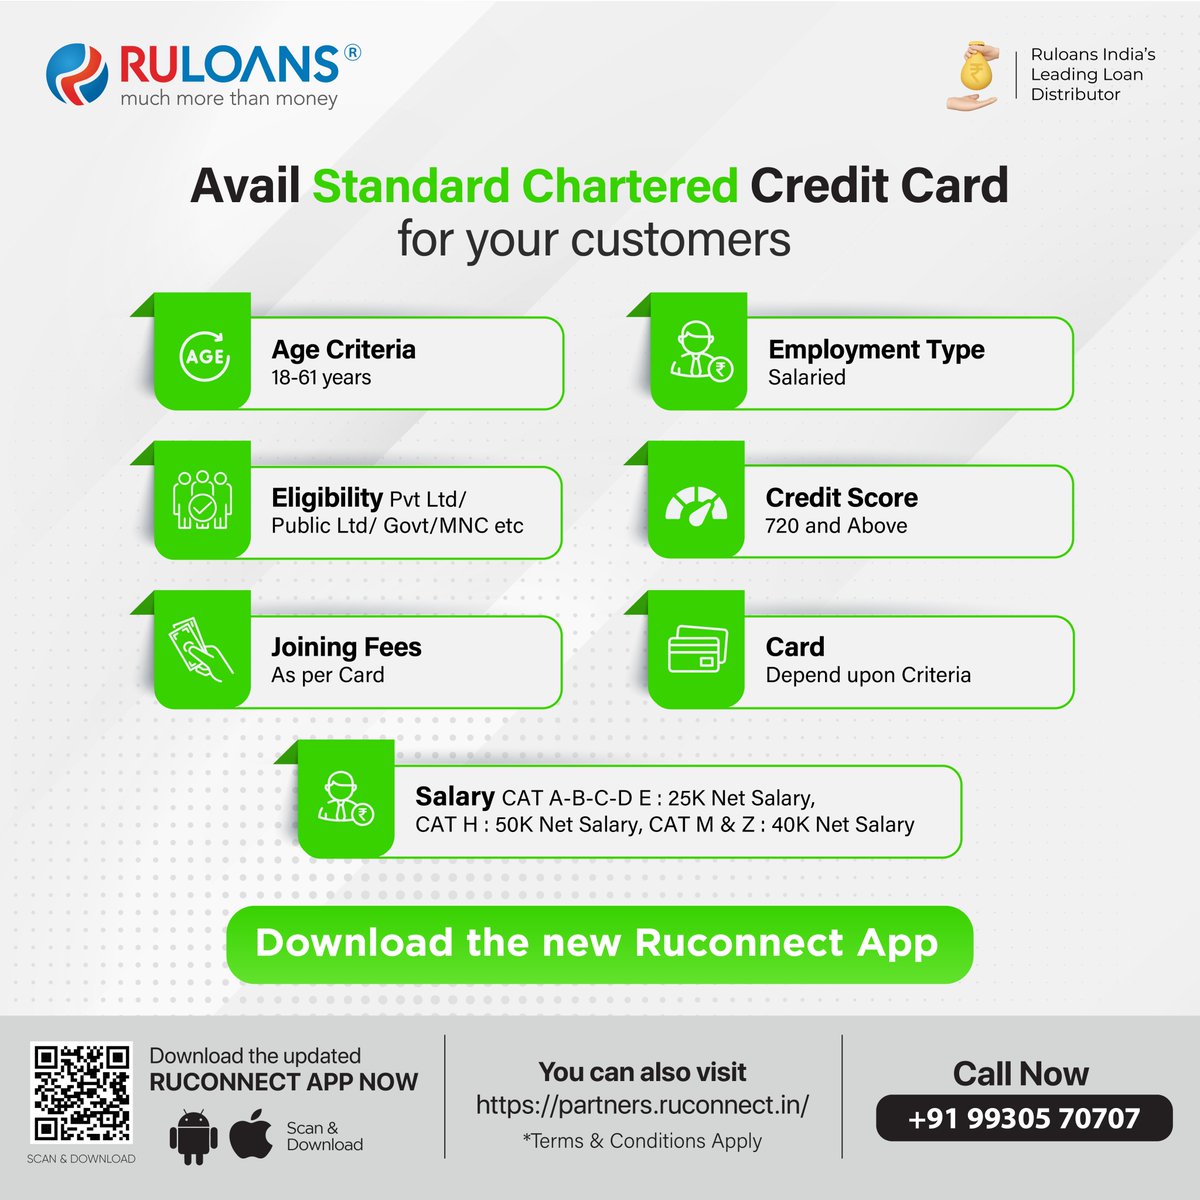 We're thrilled to announce that #StandardChartered #CreditCards are now exclusively available on Ruconnect App for your customers! With a wide range of benefits and features, these credit cards cater to all financial needs.
#CreditCard #RuconnectApp #Ruloans #FinancialSolutions